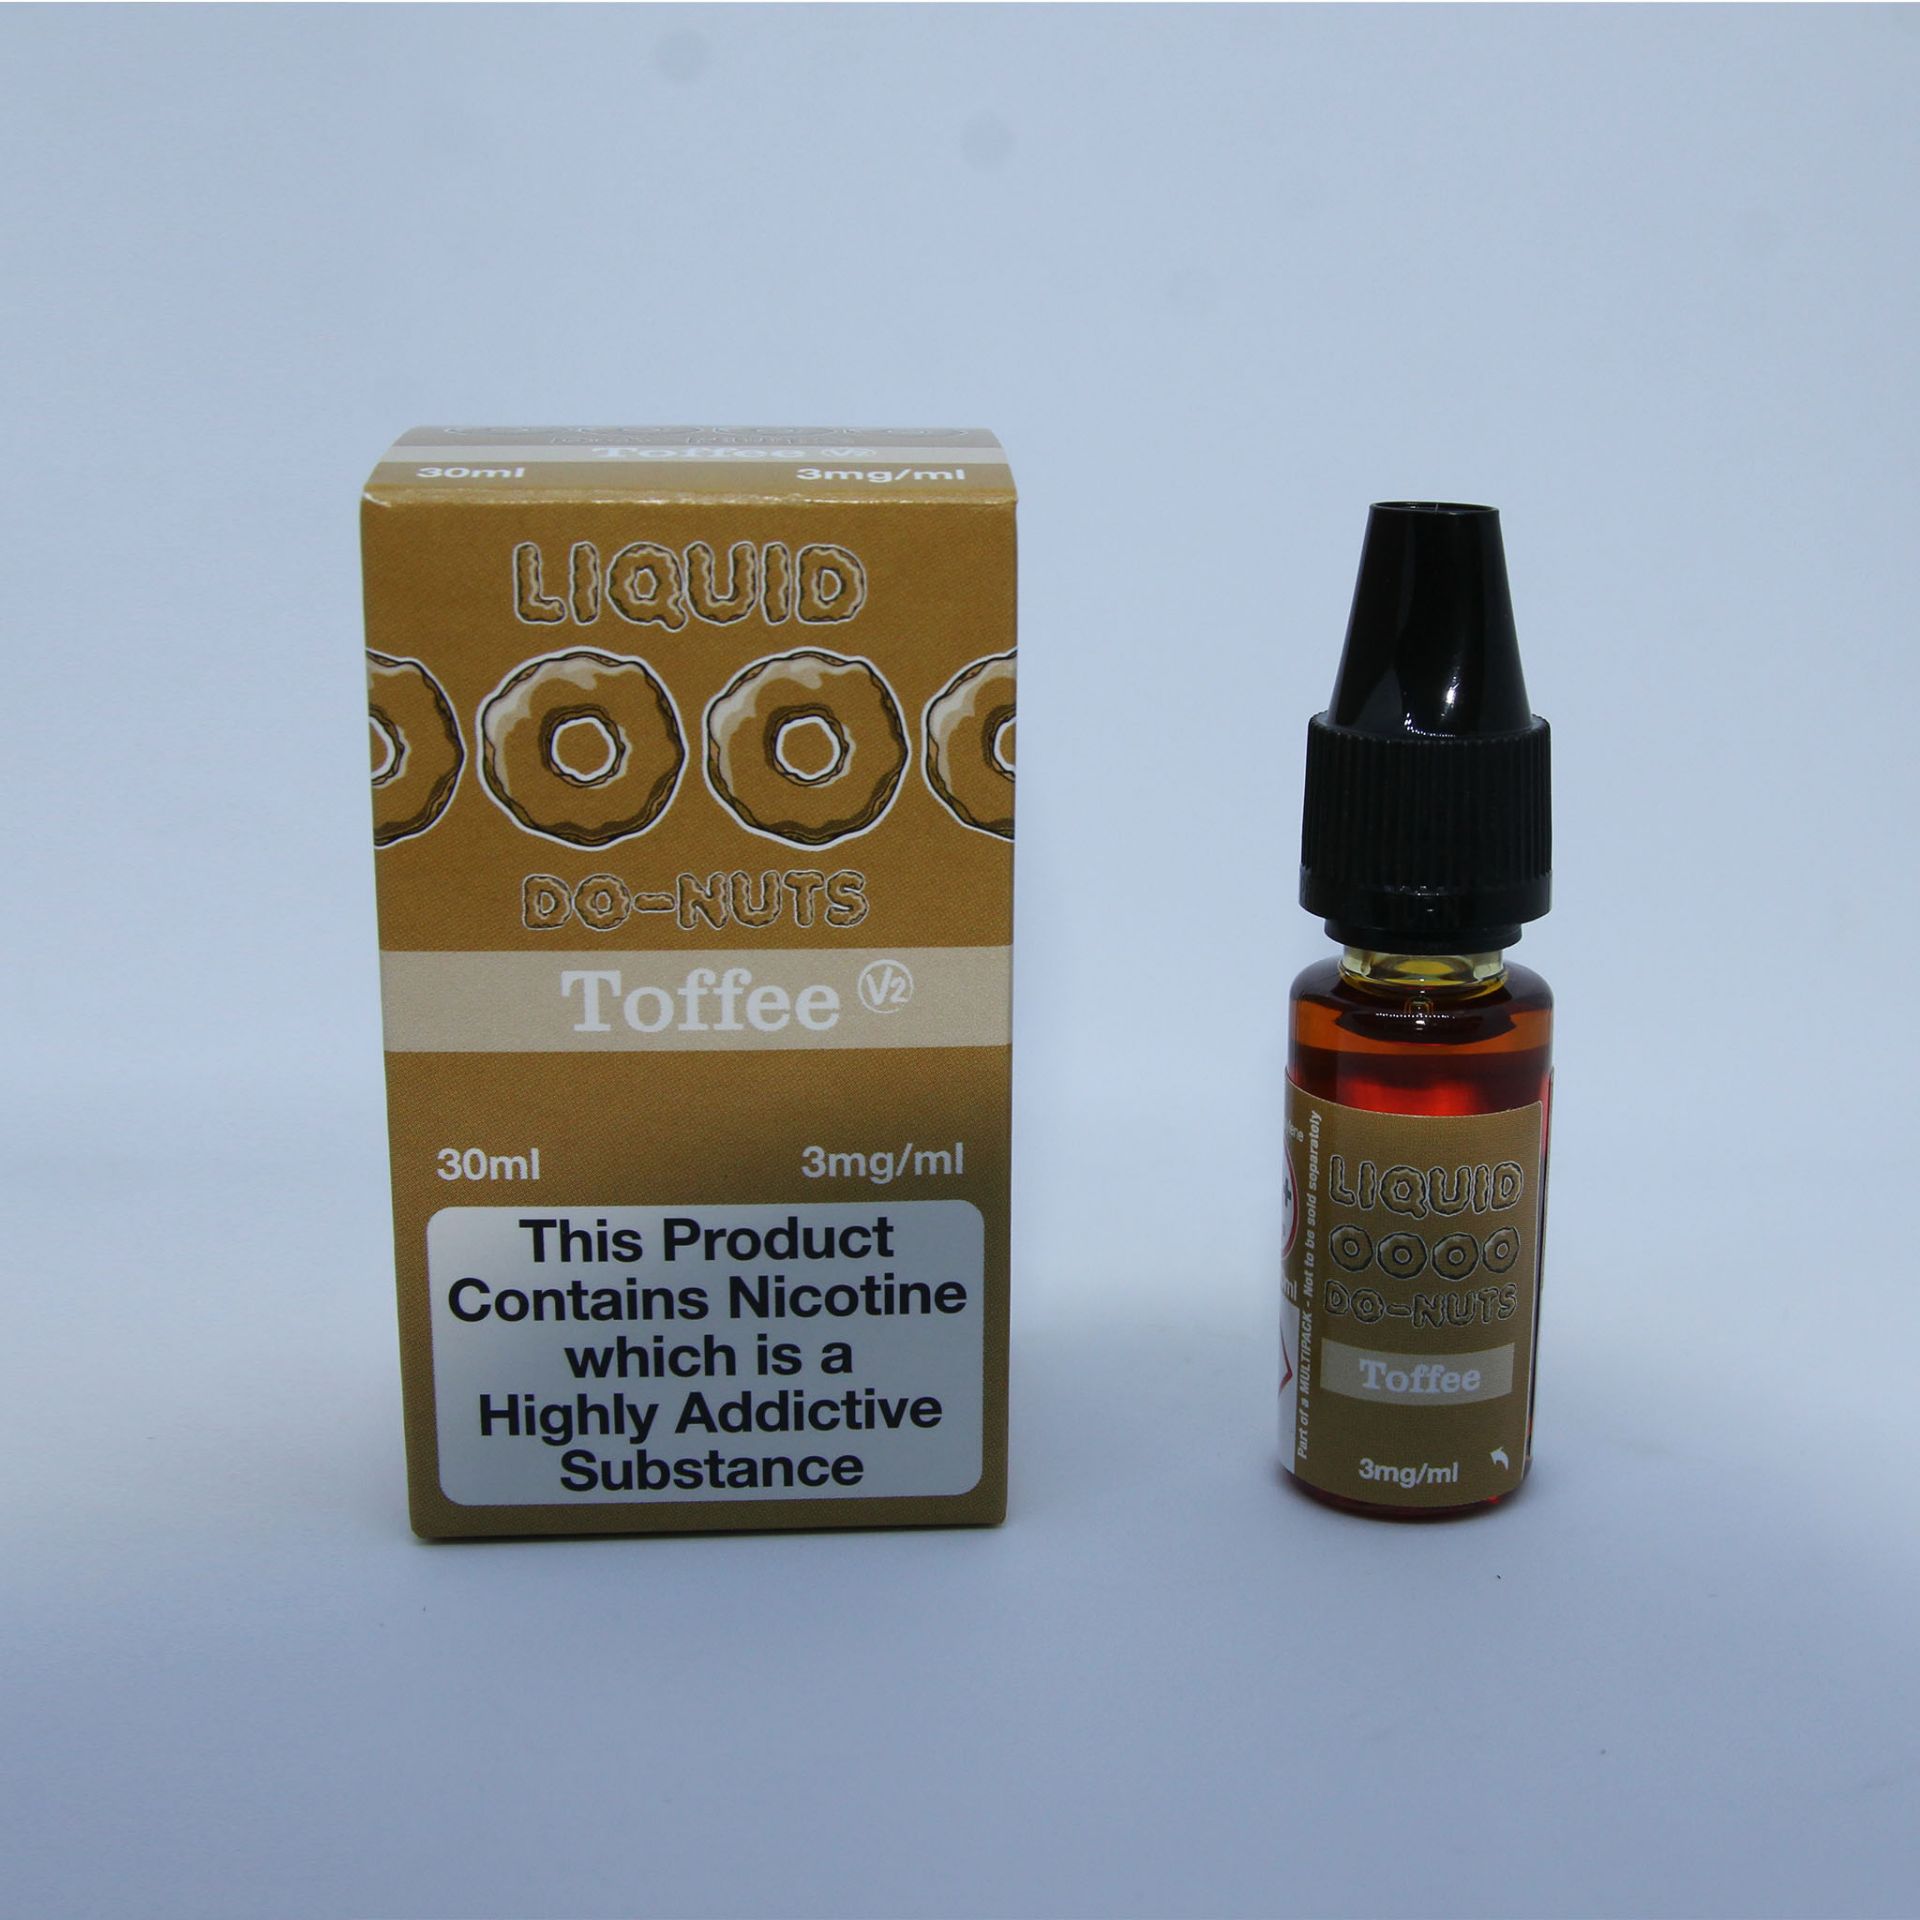 15,000 Bottles of OOOO Donuts Toffee and Raspberry Premium E-Liquids | Past Expiry Date